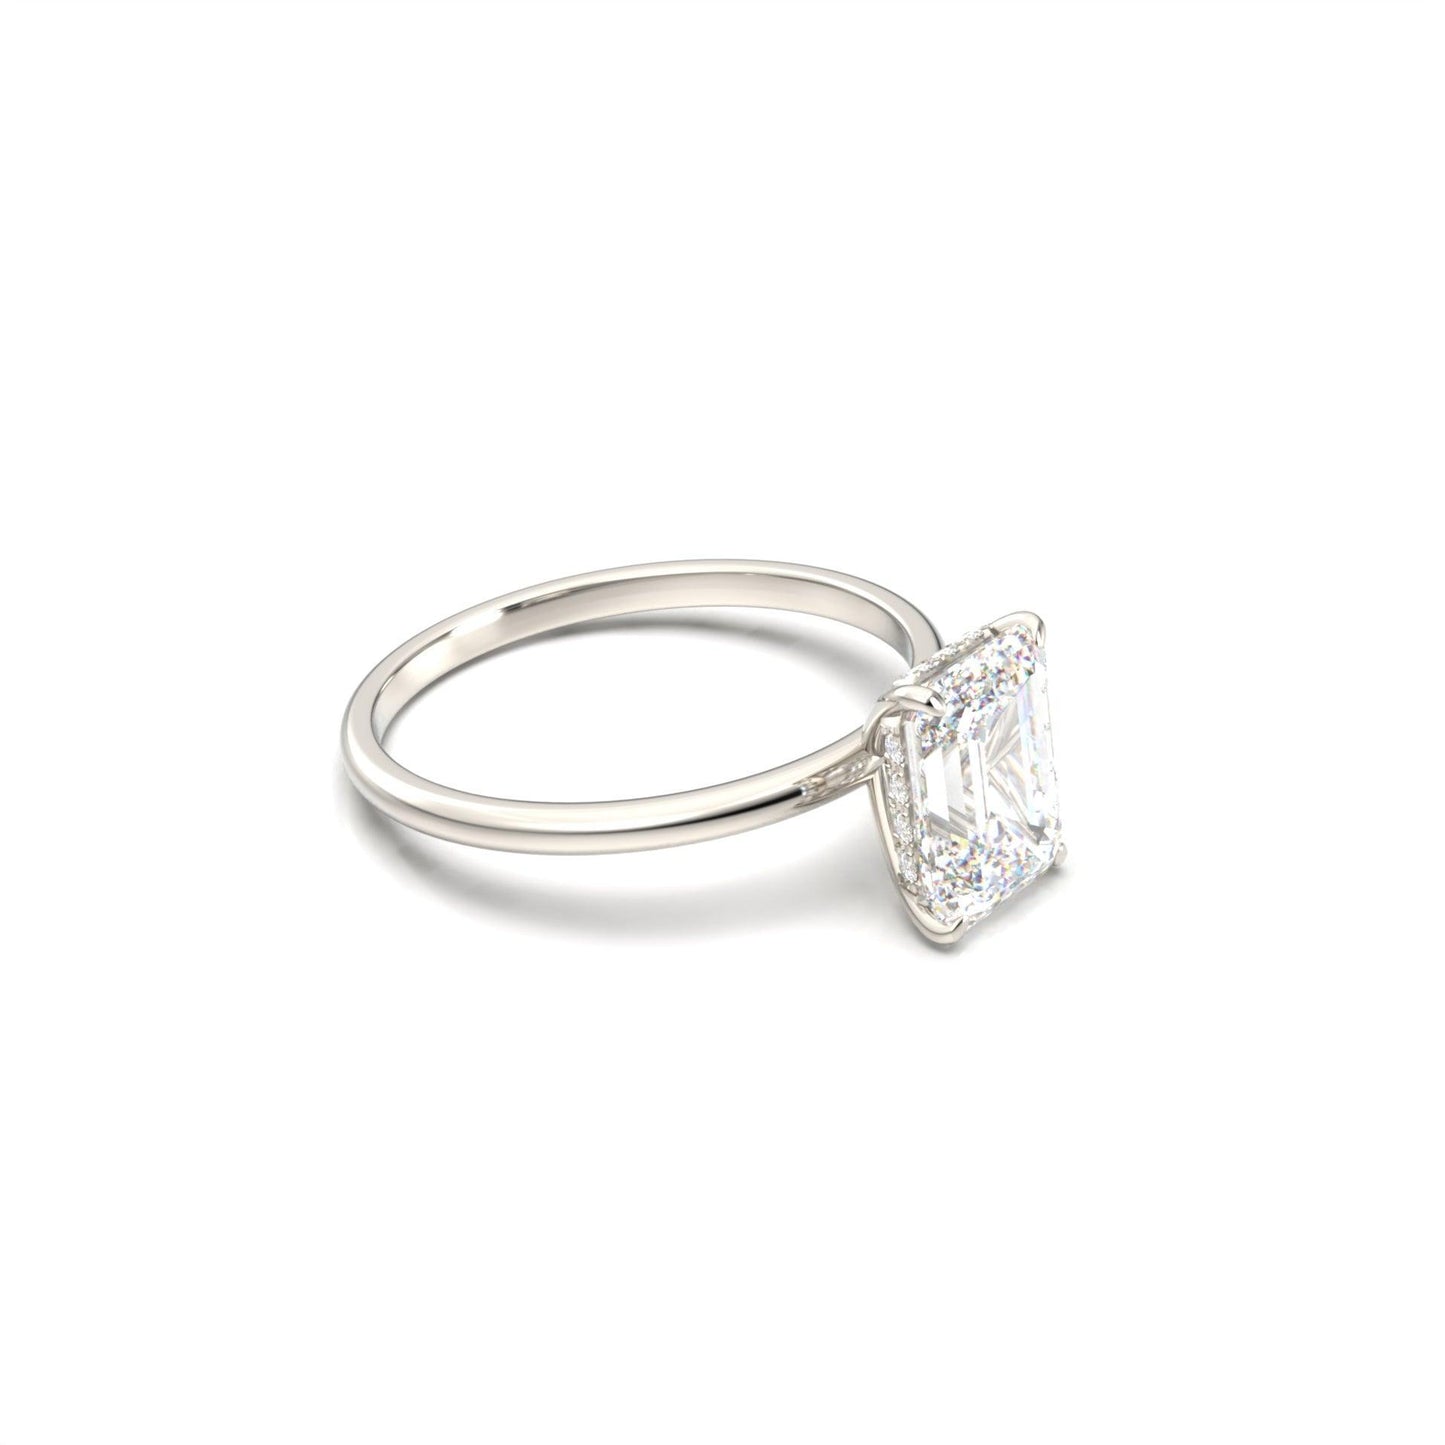 Emerald Cut Solitaire 4 Claw With Hidden Halo Moissanite Engagement Ring - moissaniteengagementrings